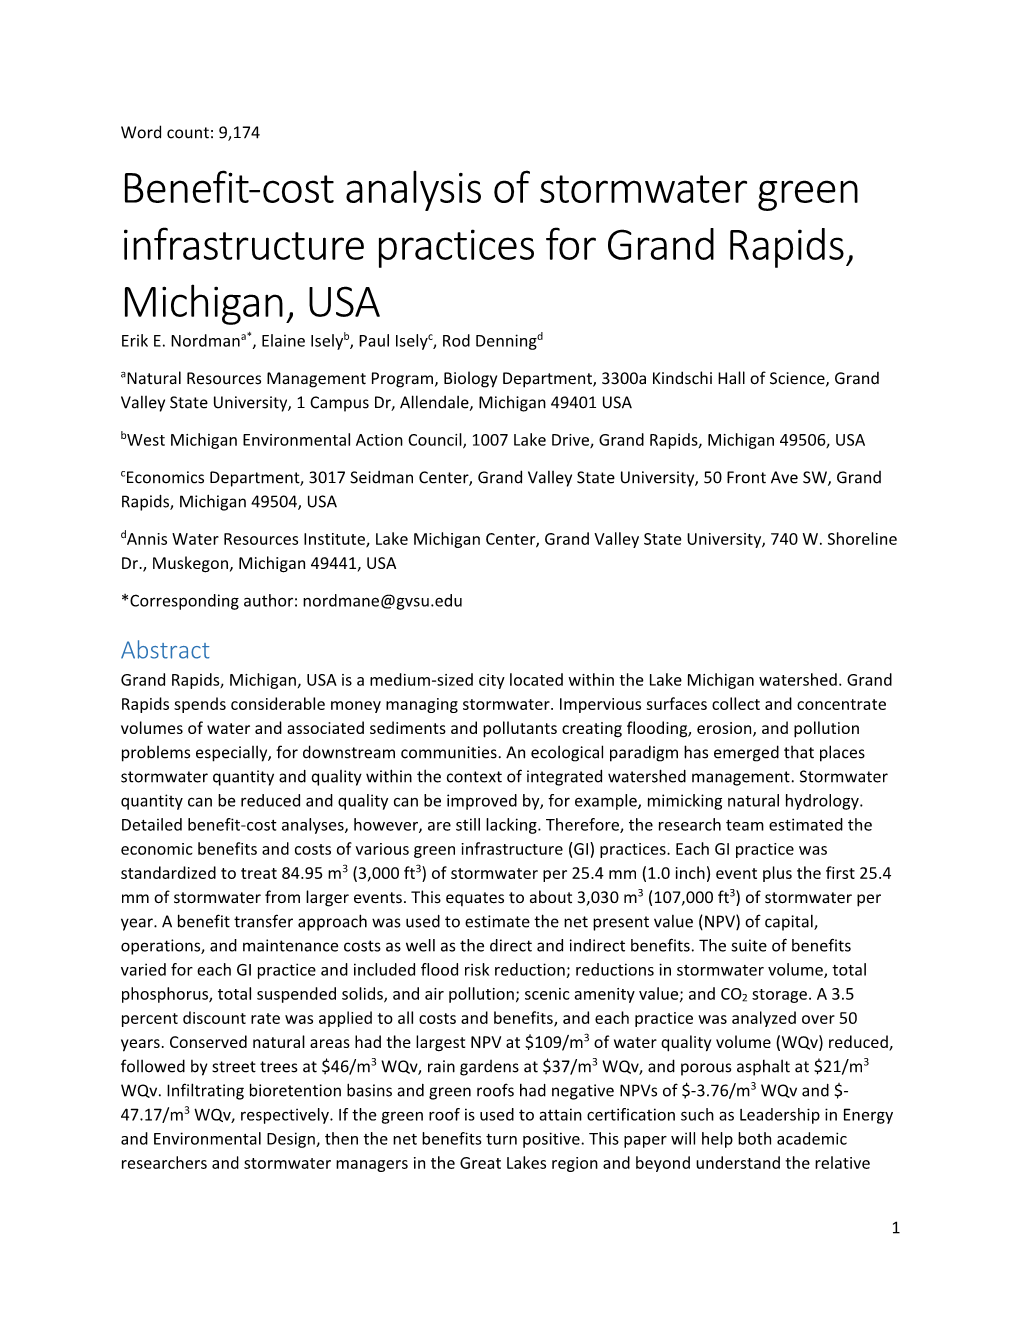 Benefit-Cost Analysis of Stormwater Green Infrastructure Practices for Grand Rapids, Michigan, USA Erik E